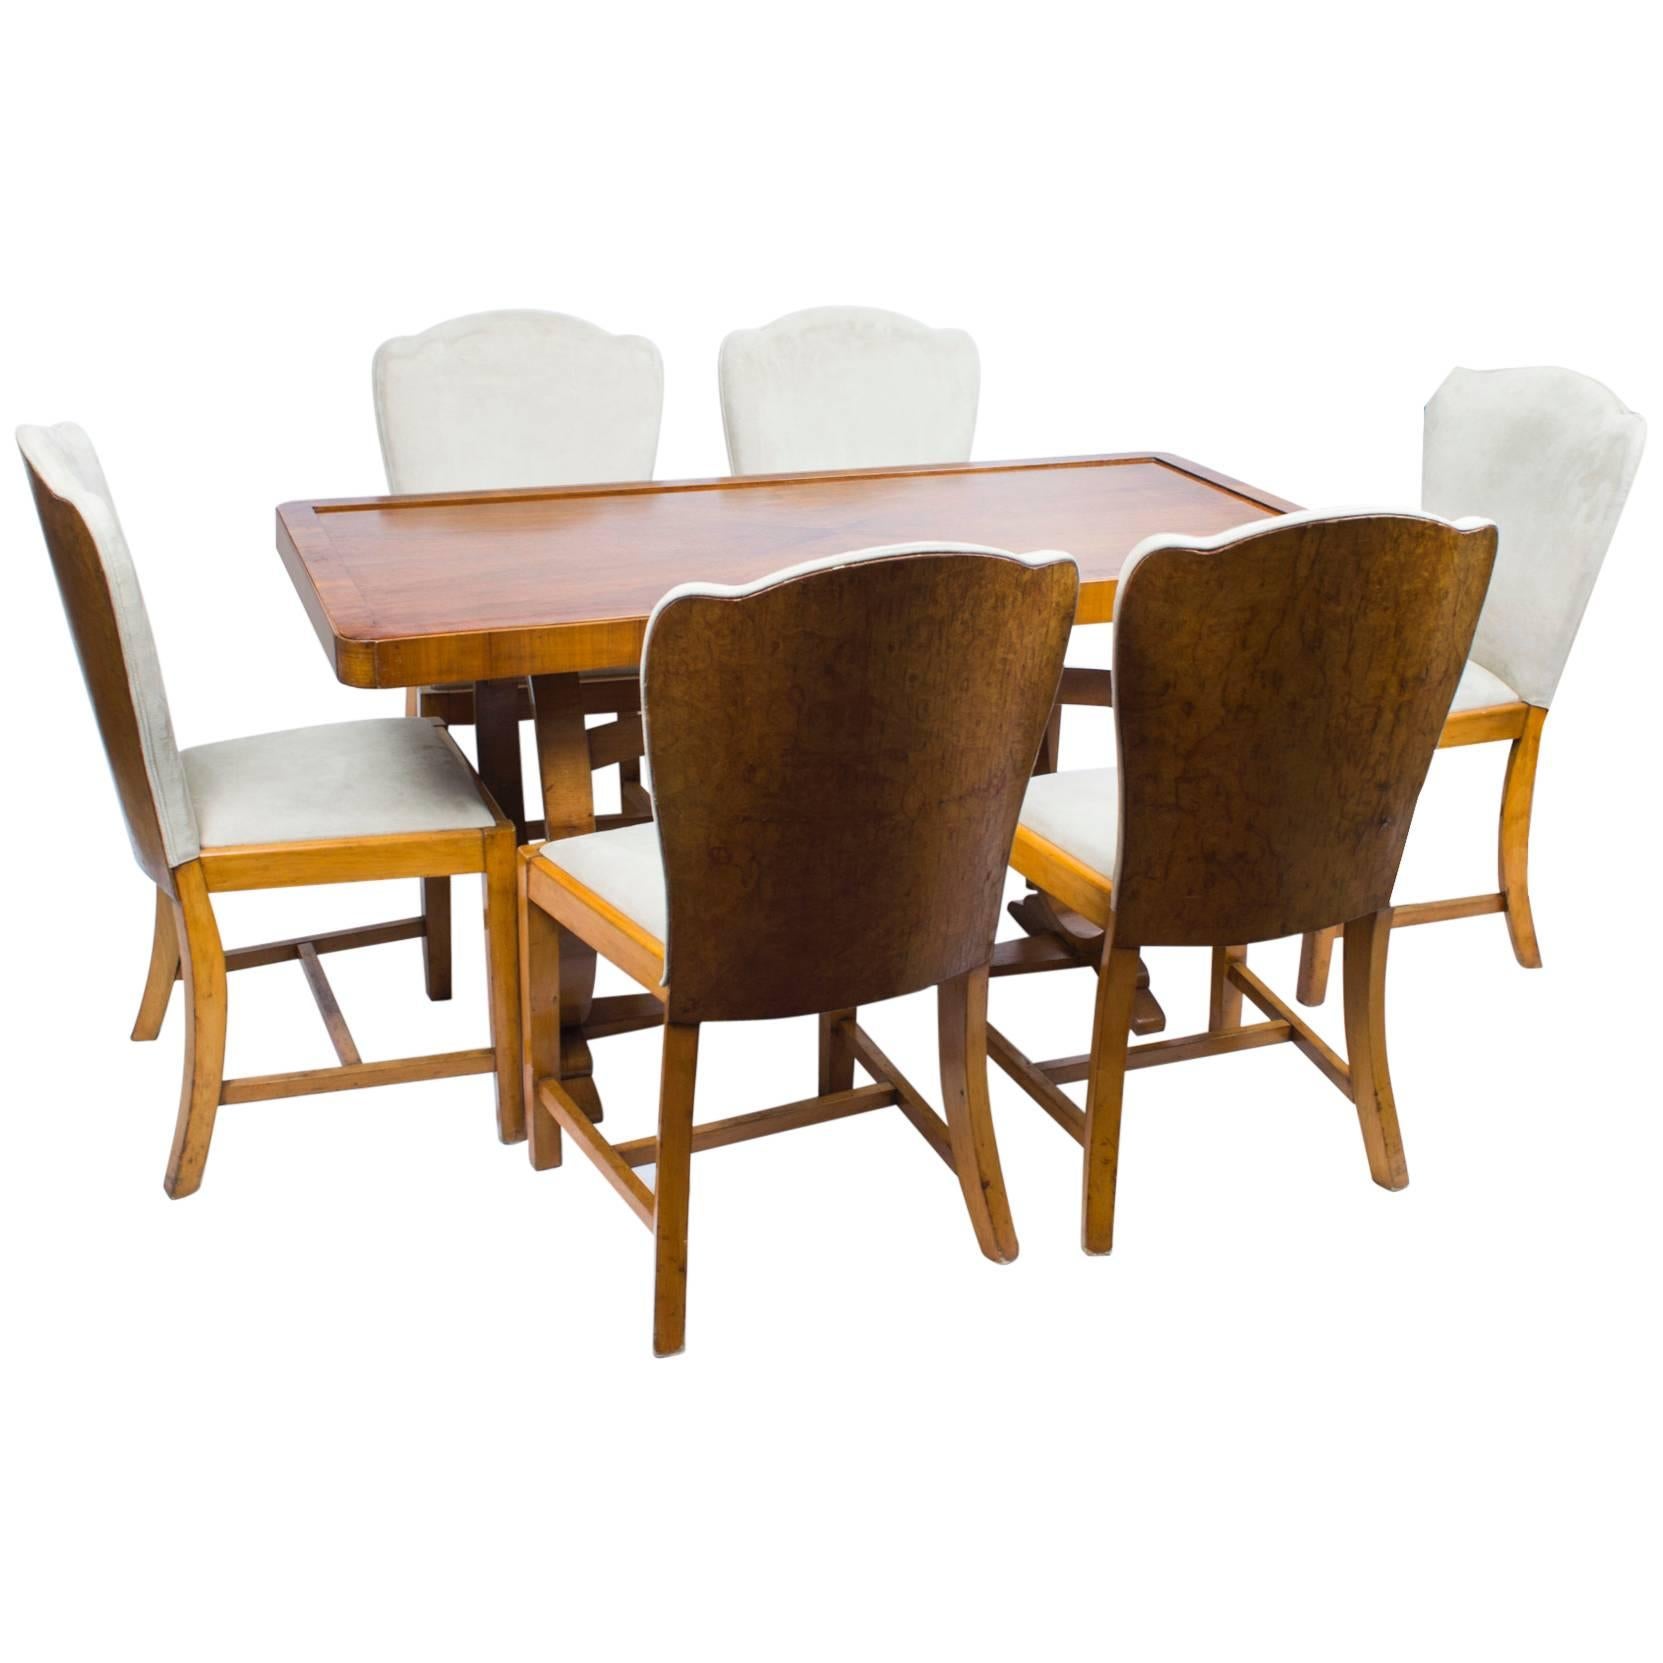 Antique Art Deco Dining Table and Six Chairs, circa 1930